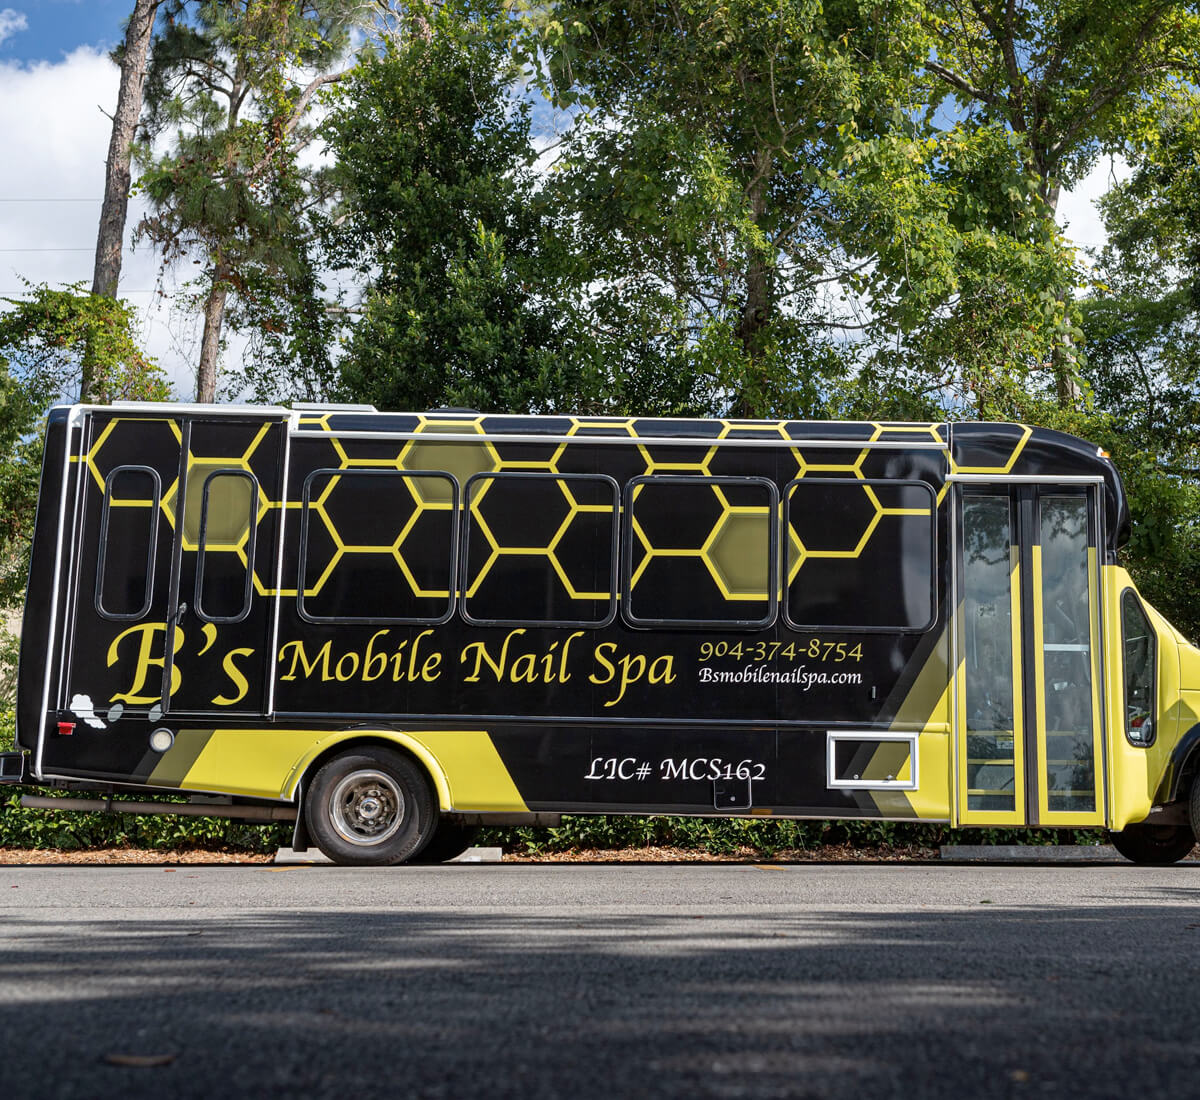 Yellow and black bus with nail spa business graphics.